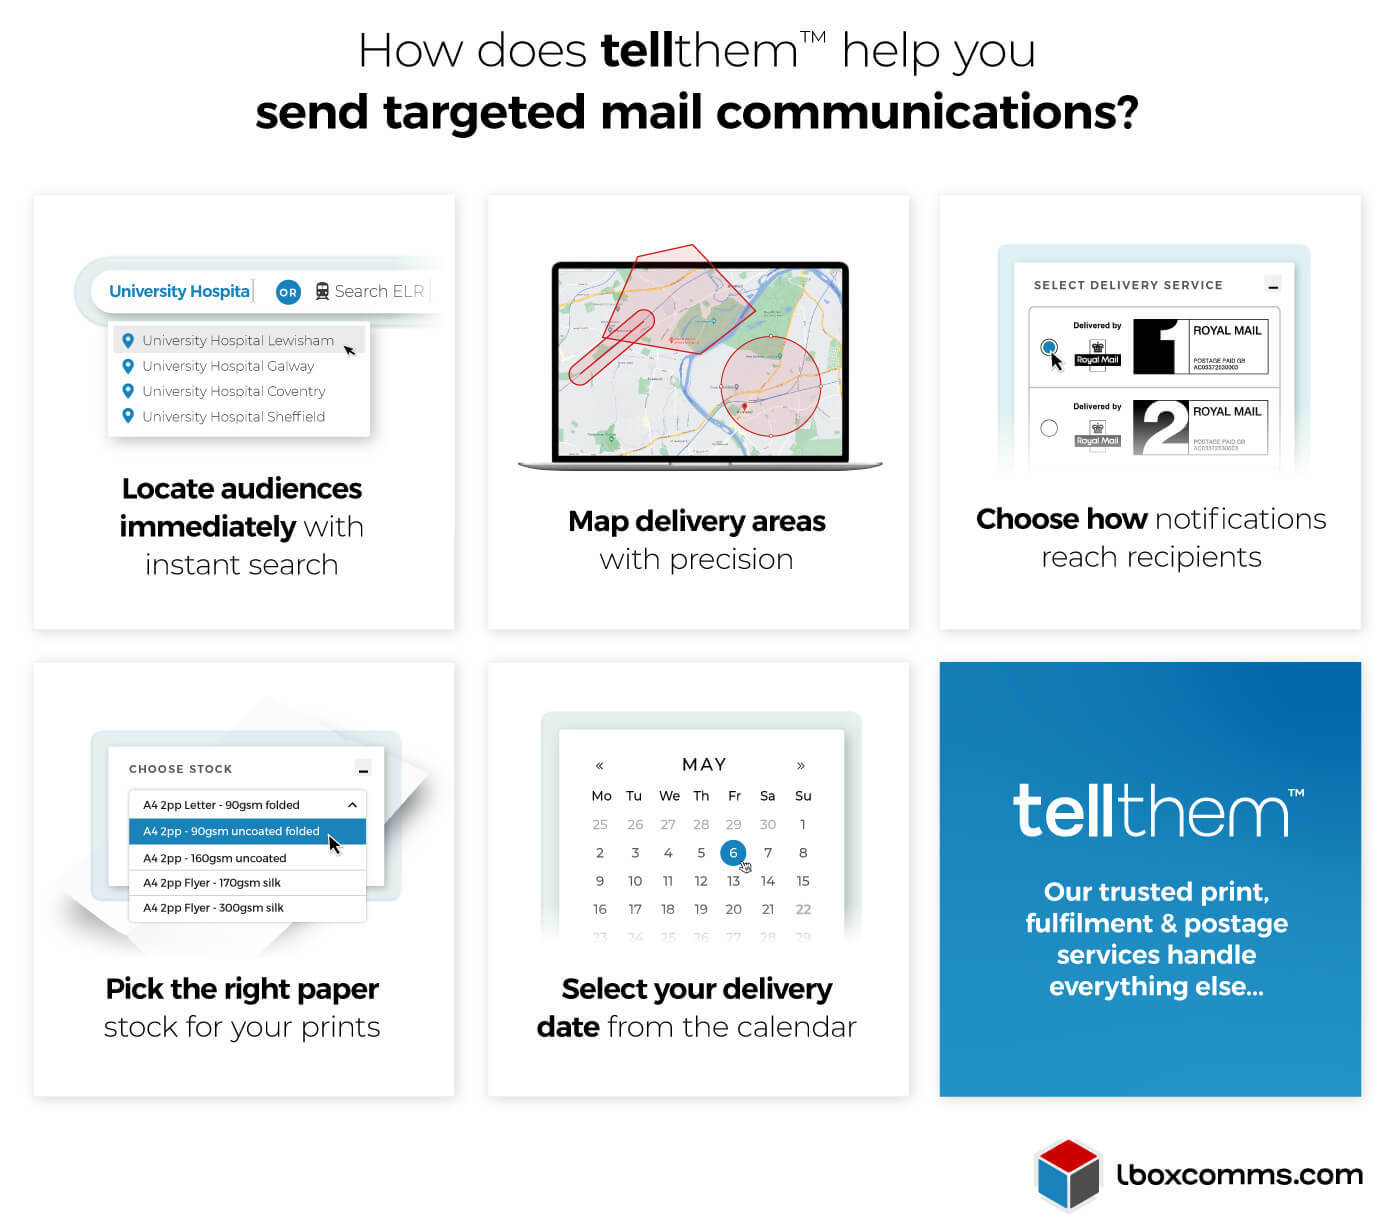 How tellthem TDMP helps send targeted mail communications and save time